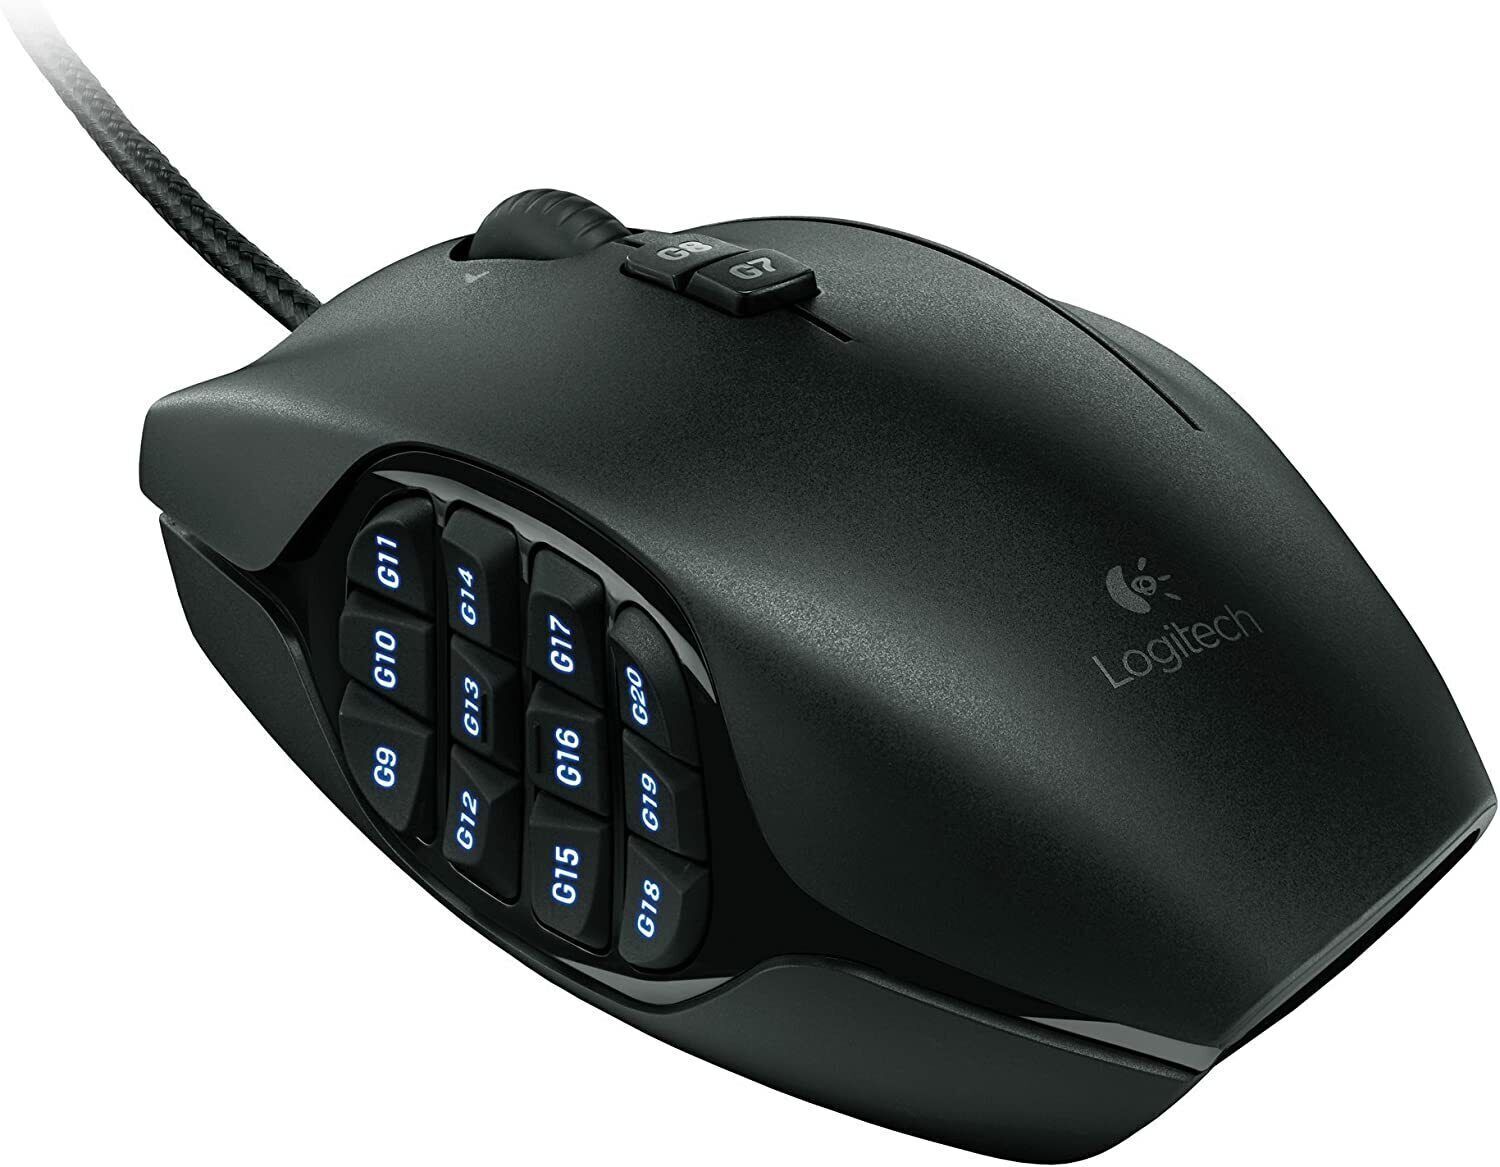 Logitech G600 MMO RGB Wired Optical Gaming Mouse 20 Buttons Black - 910-002864